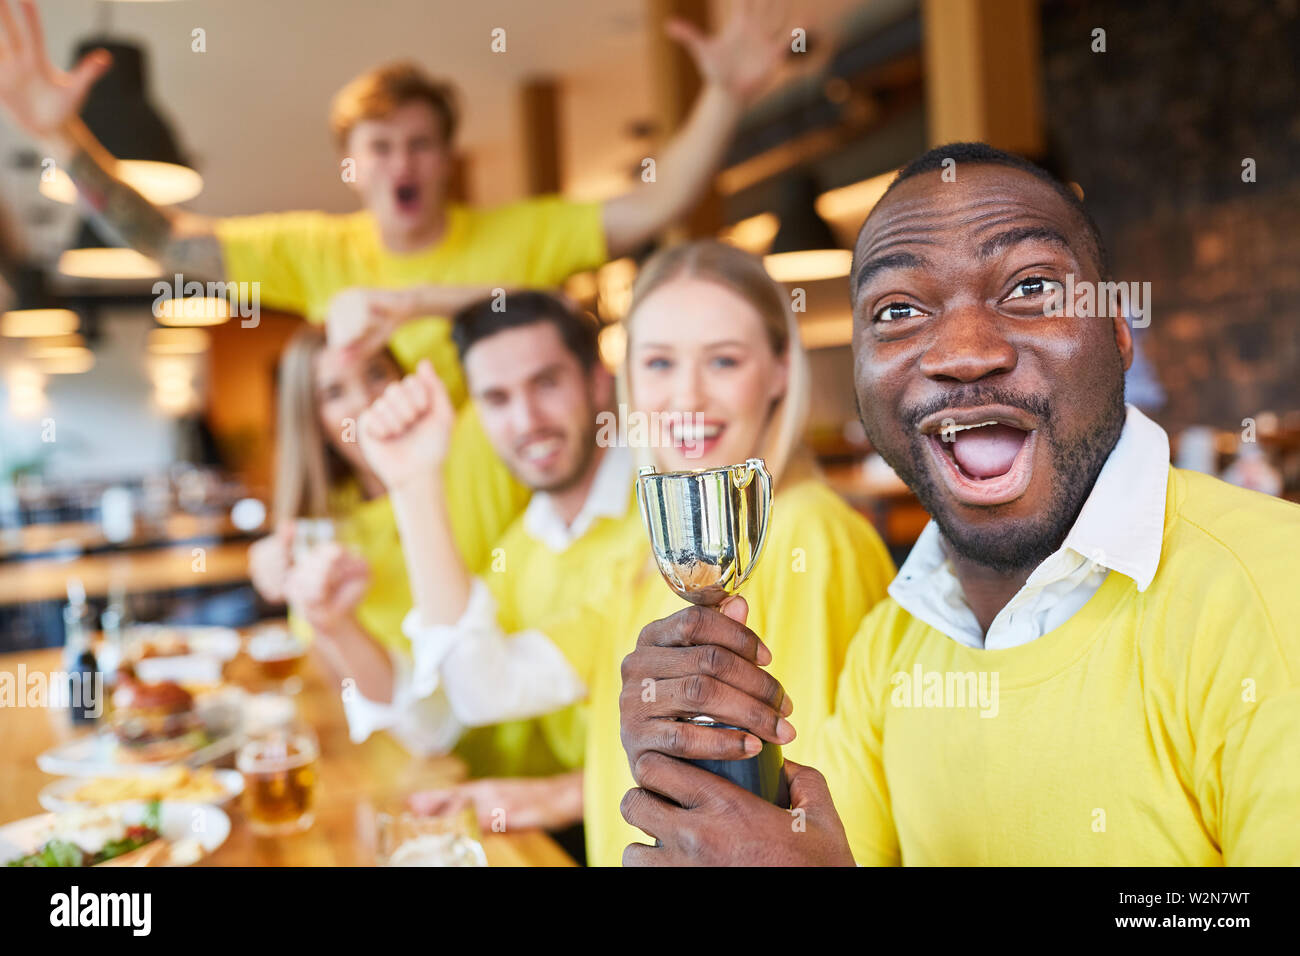 Group sports fans with a small winning trophy in a pub or restaurant Stock Photo